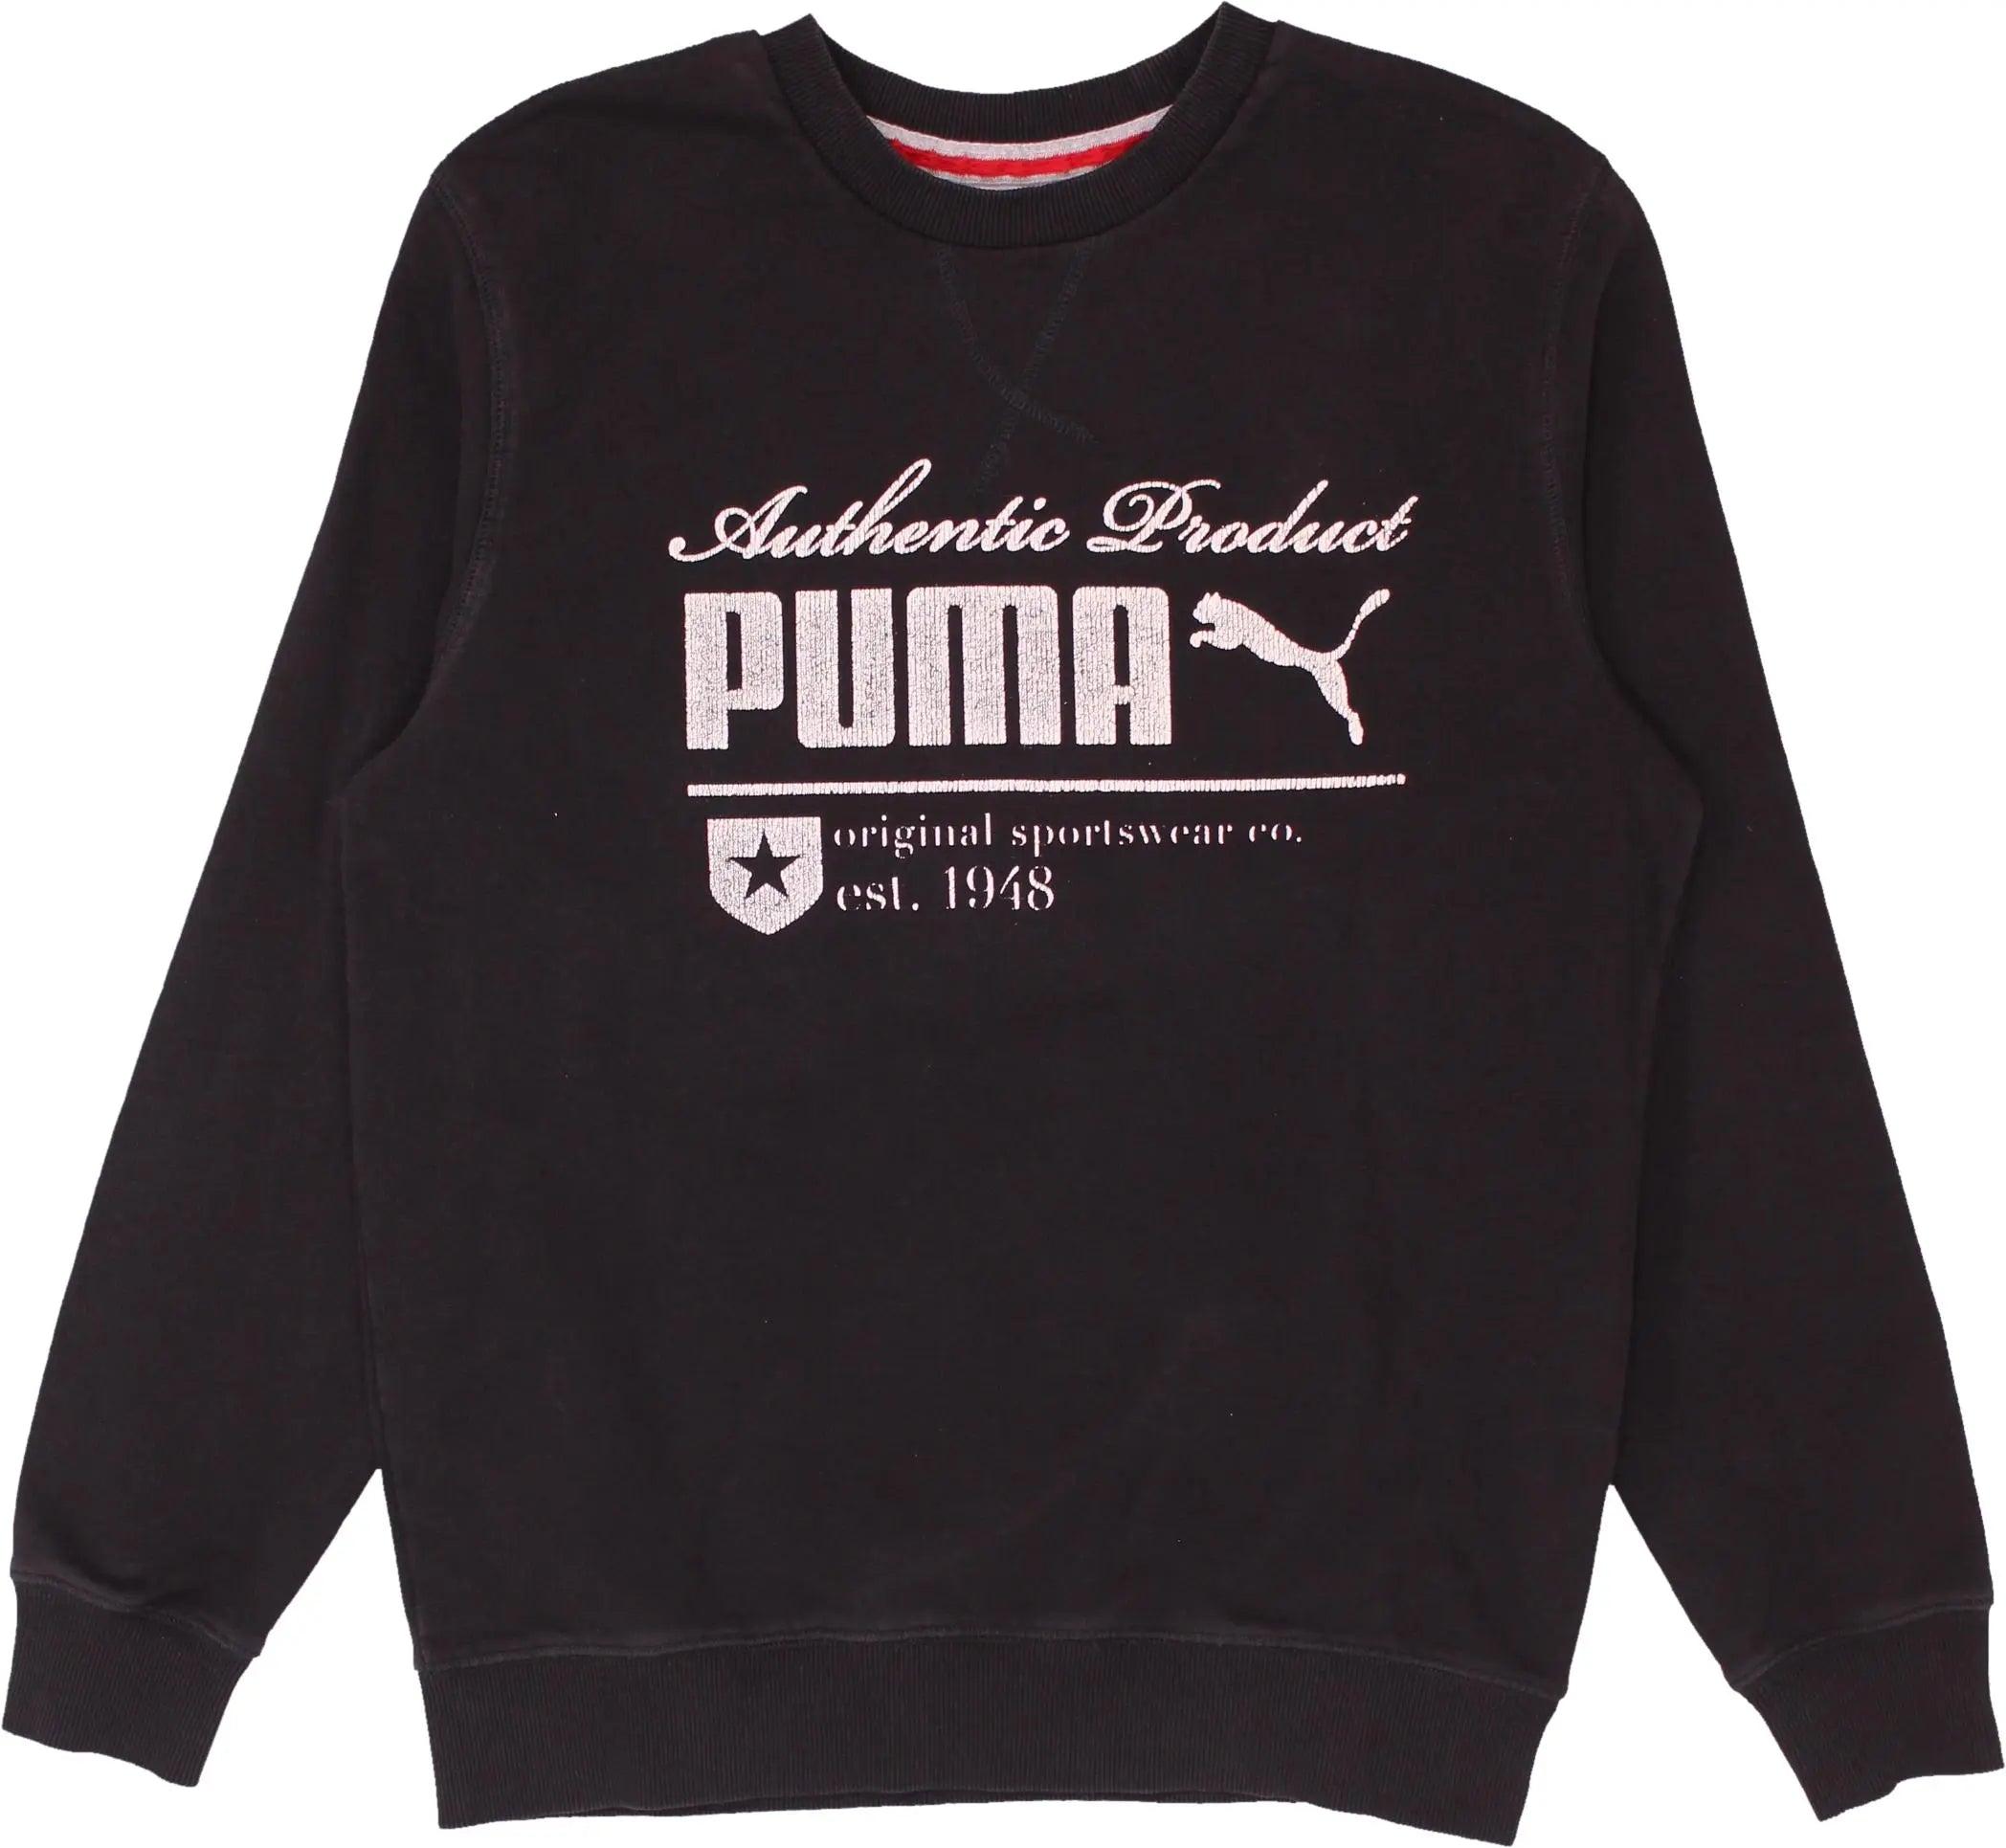 Puma - Black Sweater by Puma- ThriftTale.com - Vintage and second handclothing